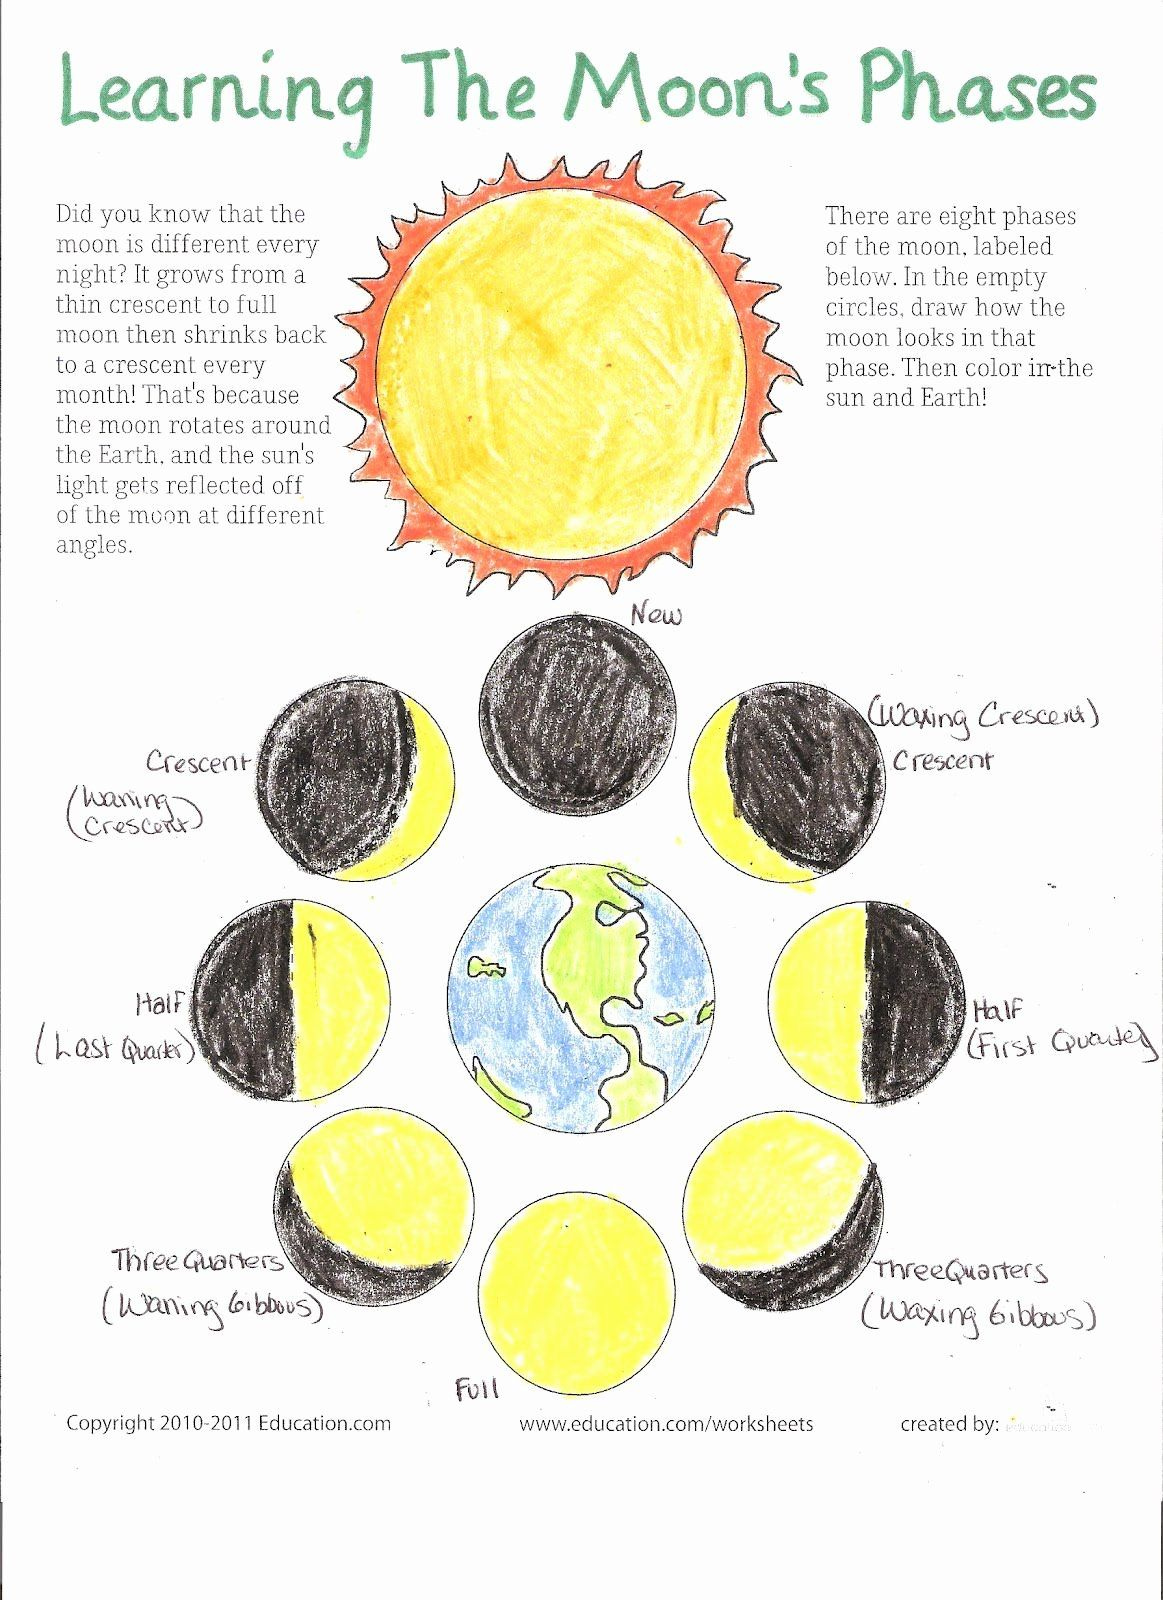 50 Moon Phases Worksheet Pdf In 2020 With Images Science Classroom 